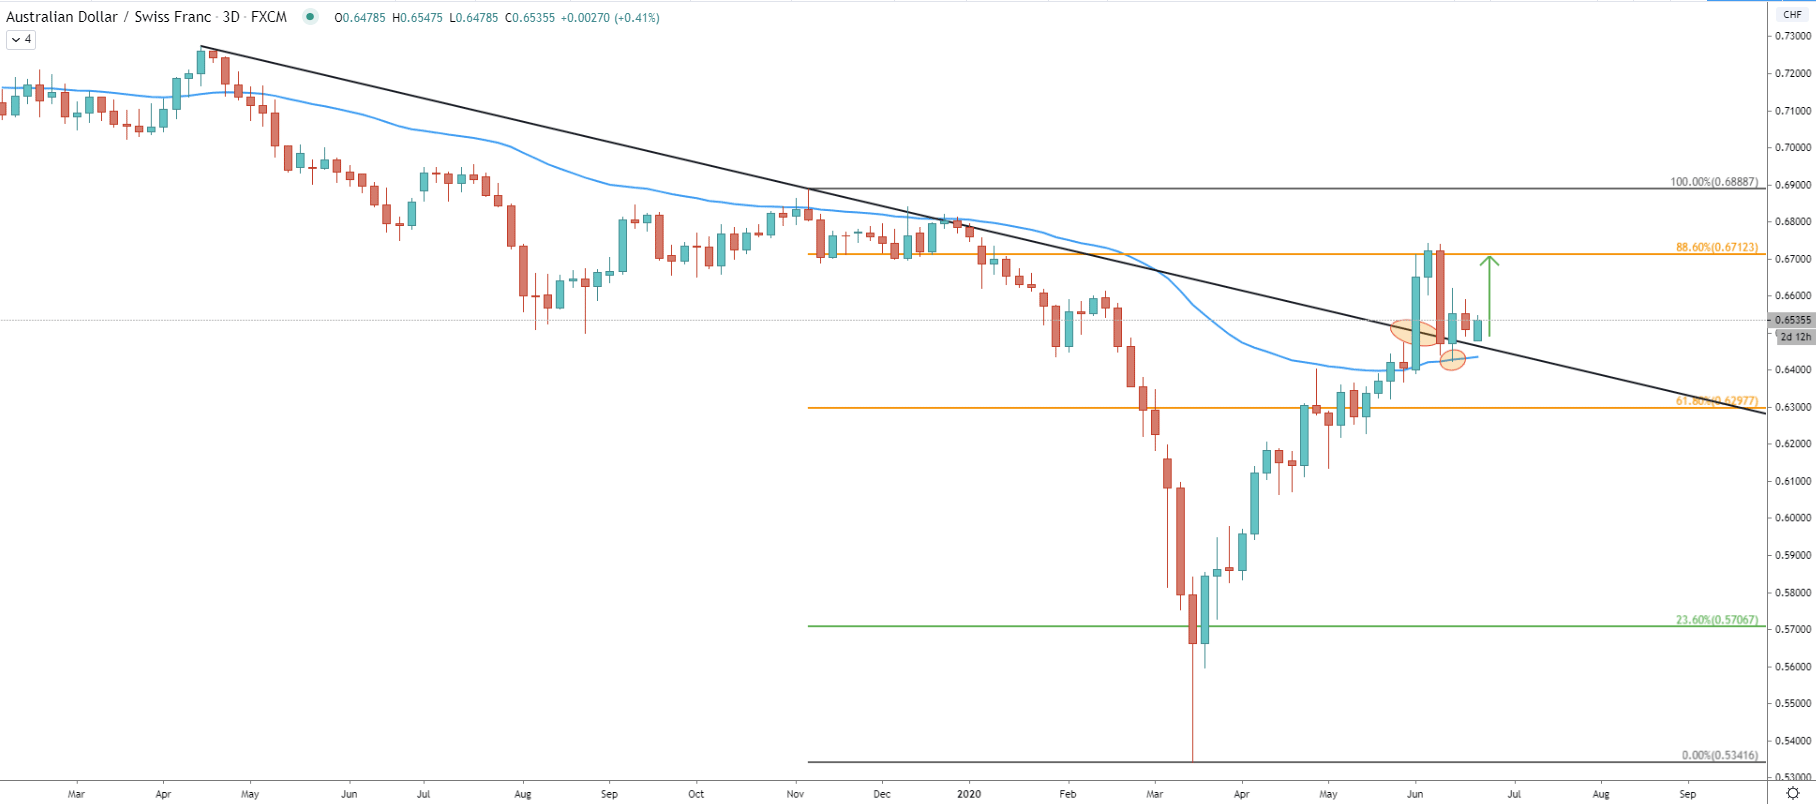 AUD/CHF 3-Day Technical Analysis 22 June 2020